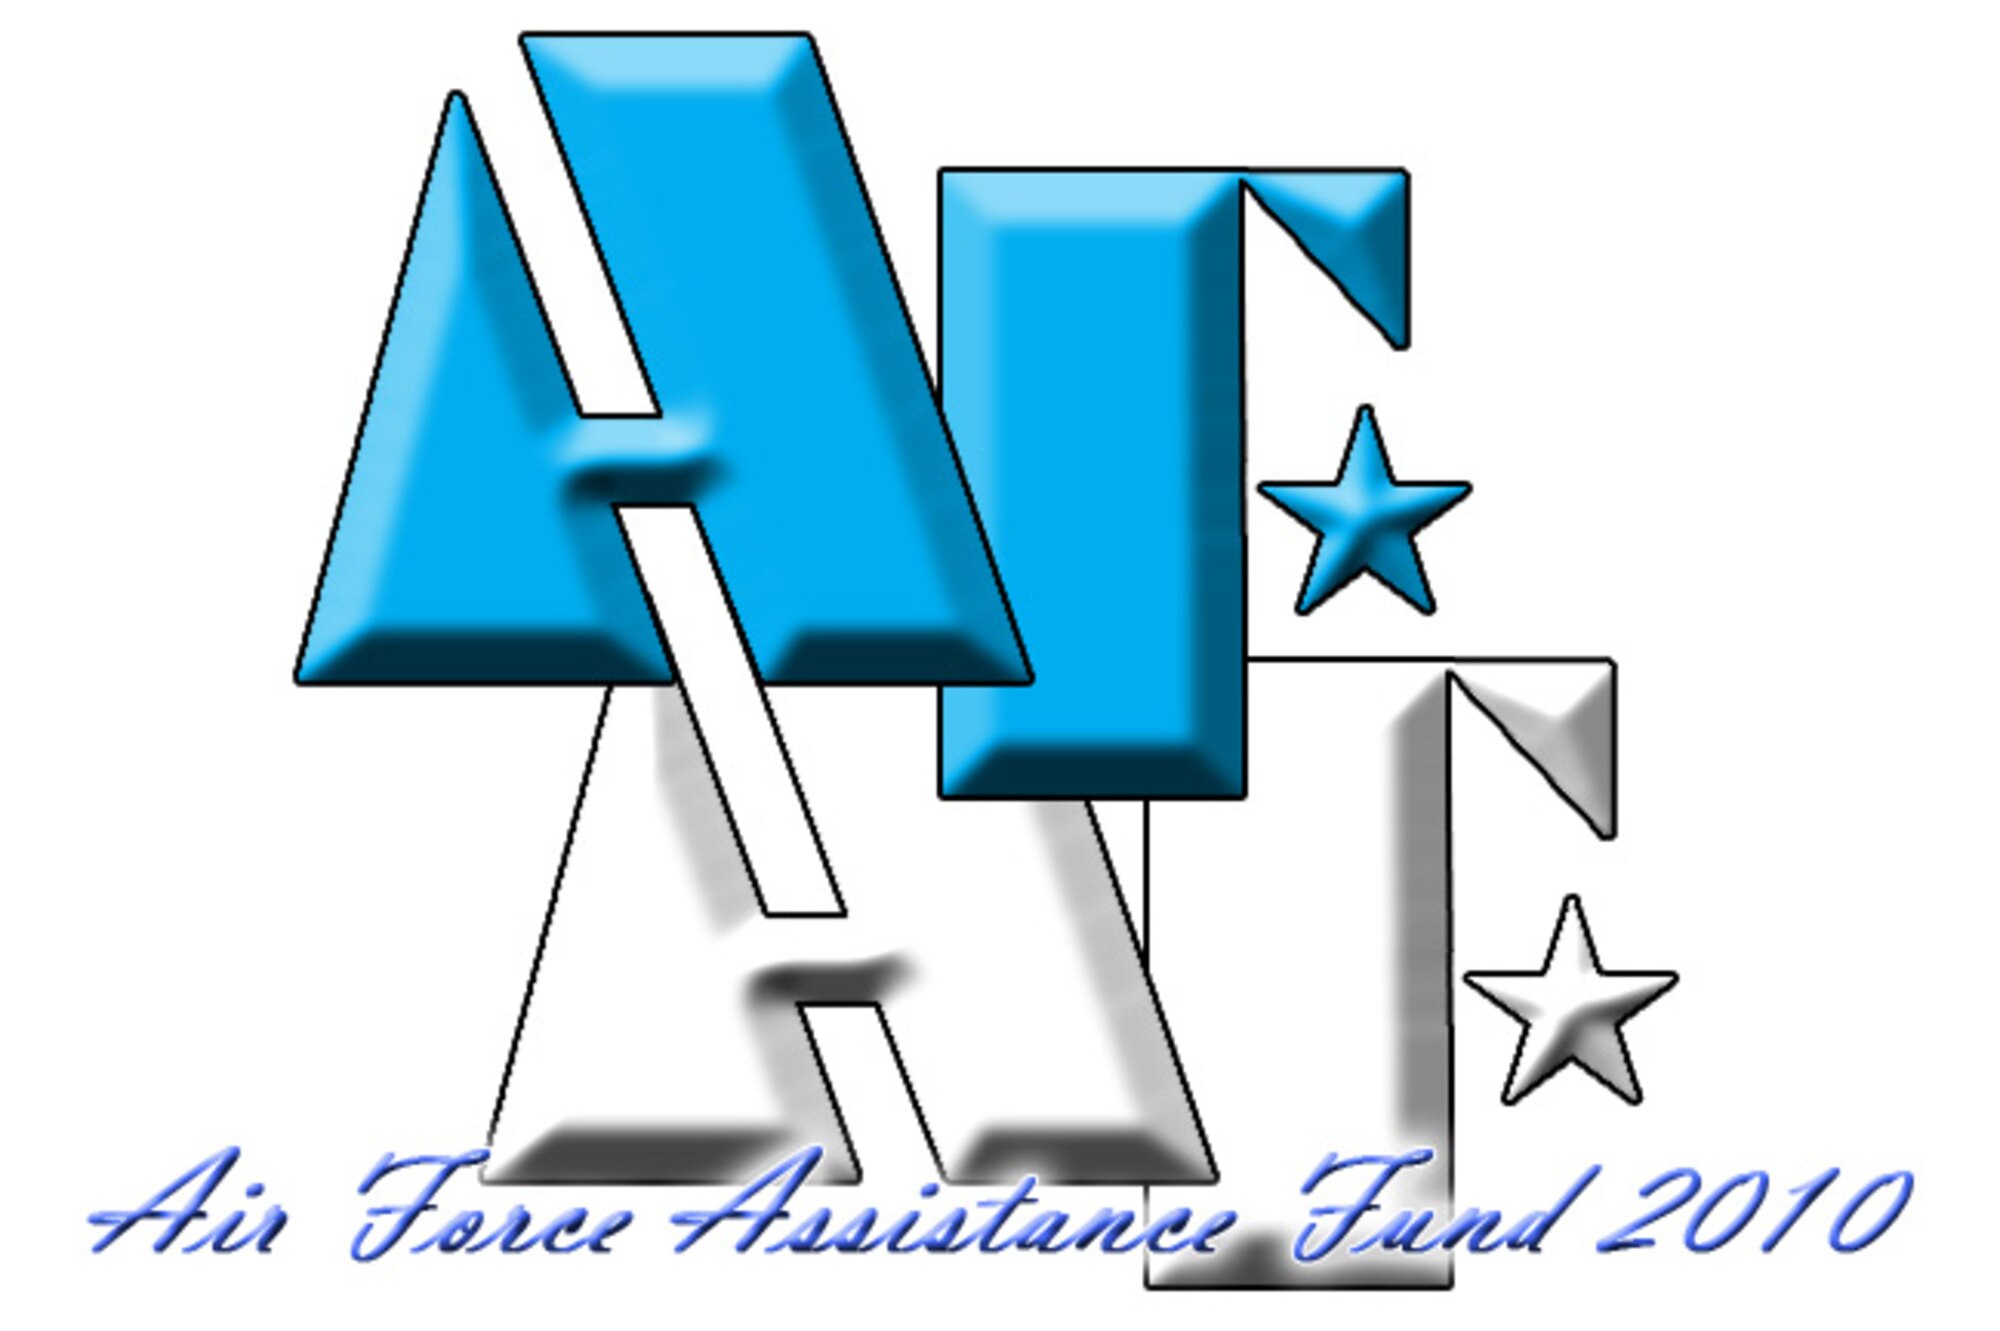 Air Force Assistance Fund 2010 graphic, based on the original logo recreated by Billy Smallwood of the Air Force News Agency. (U.S. Air Force graphic by Senior Airman Stephen Musal)